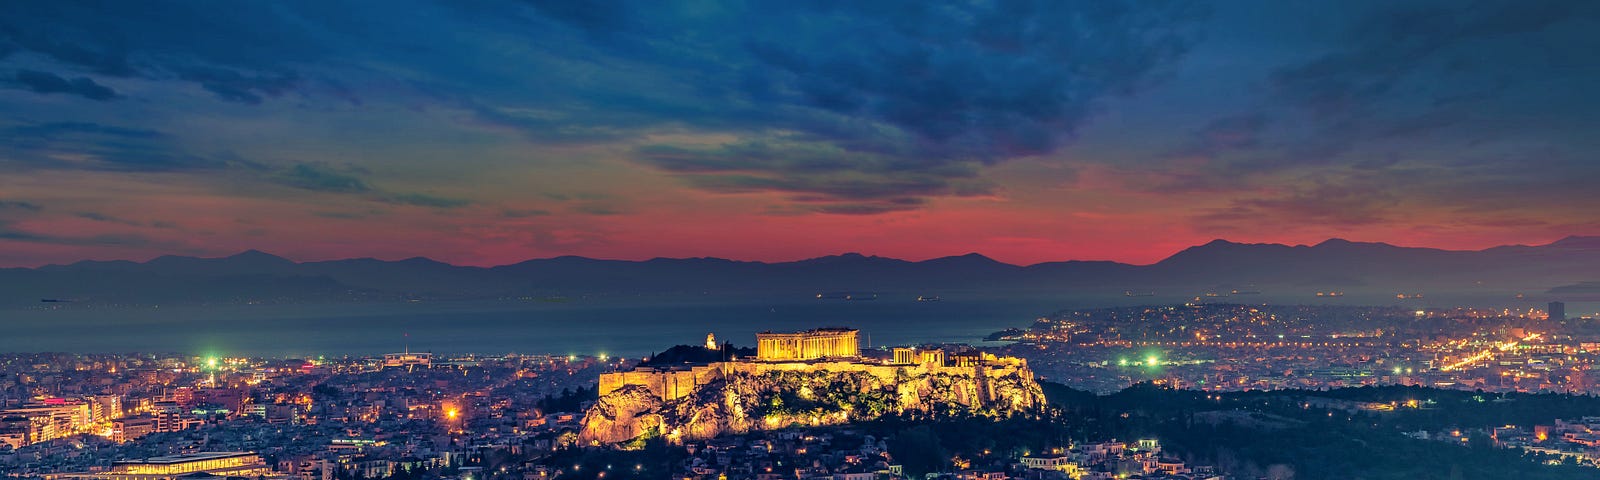 Image of Athens at night under Orange and deep Blue Sky. The city and the acropolis is lit up by lights